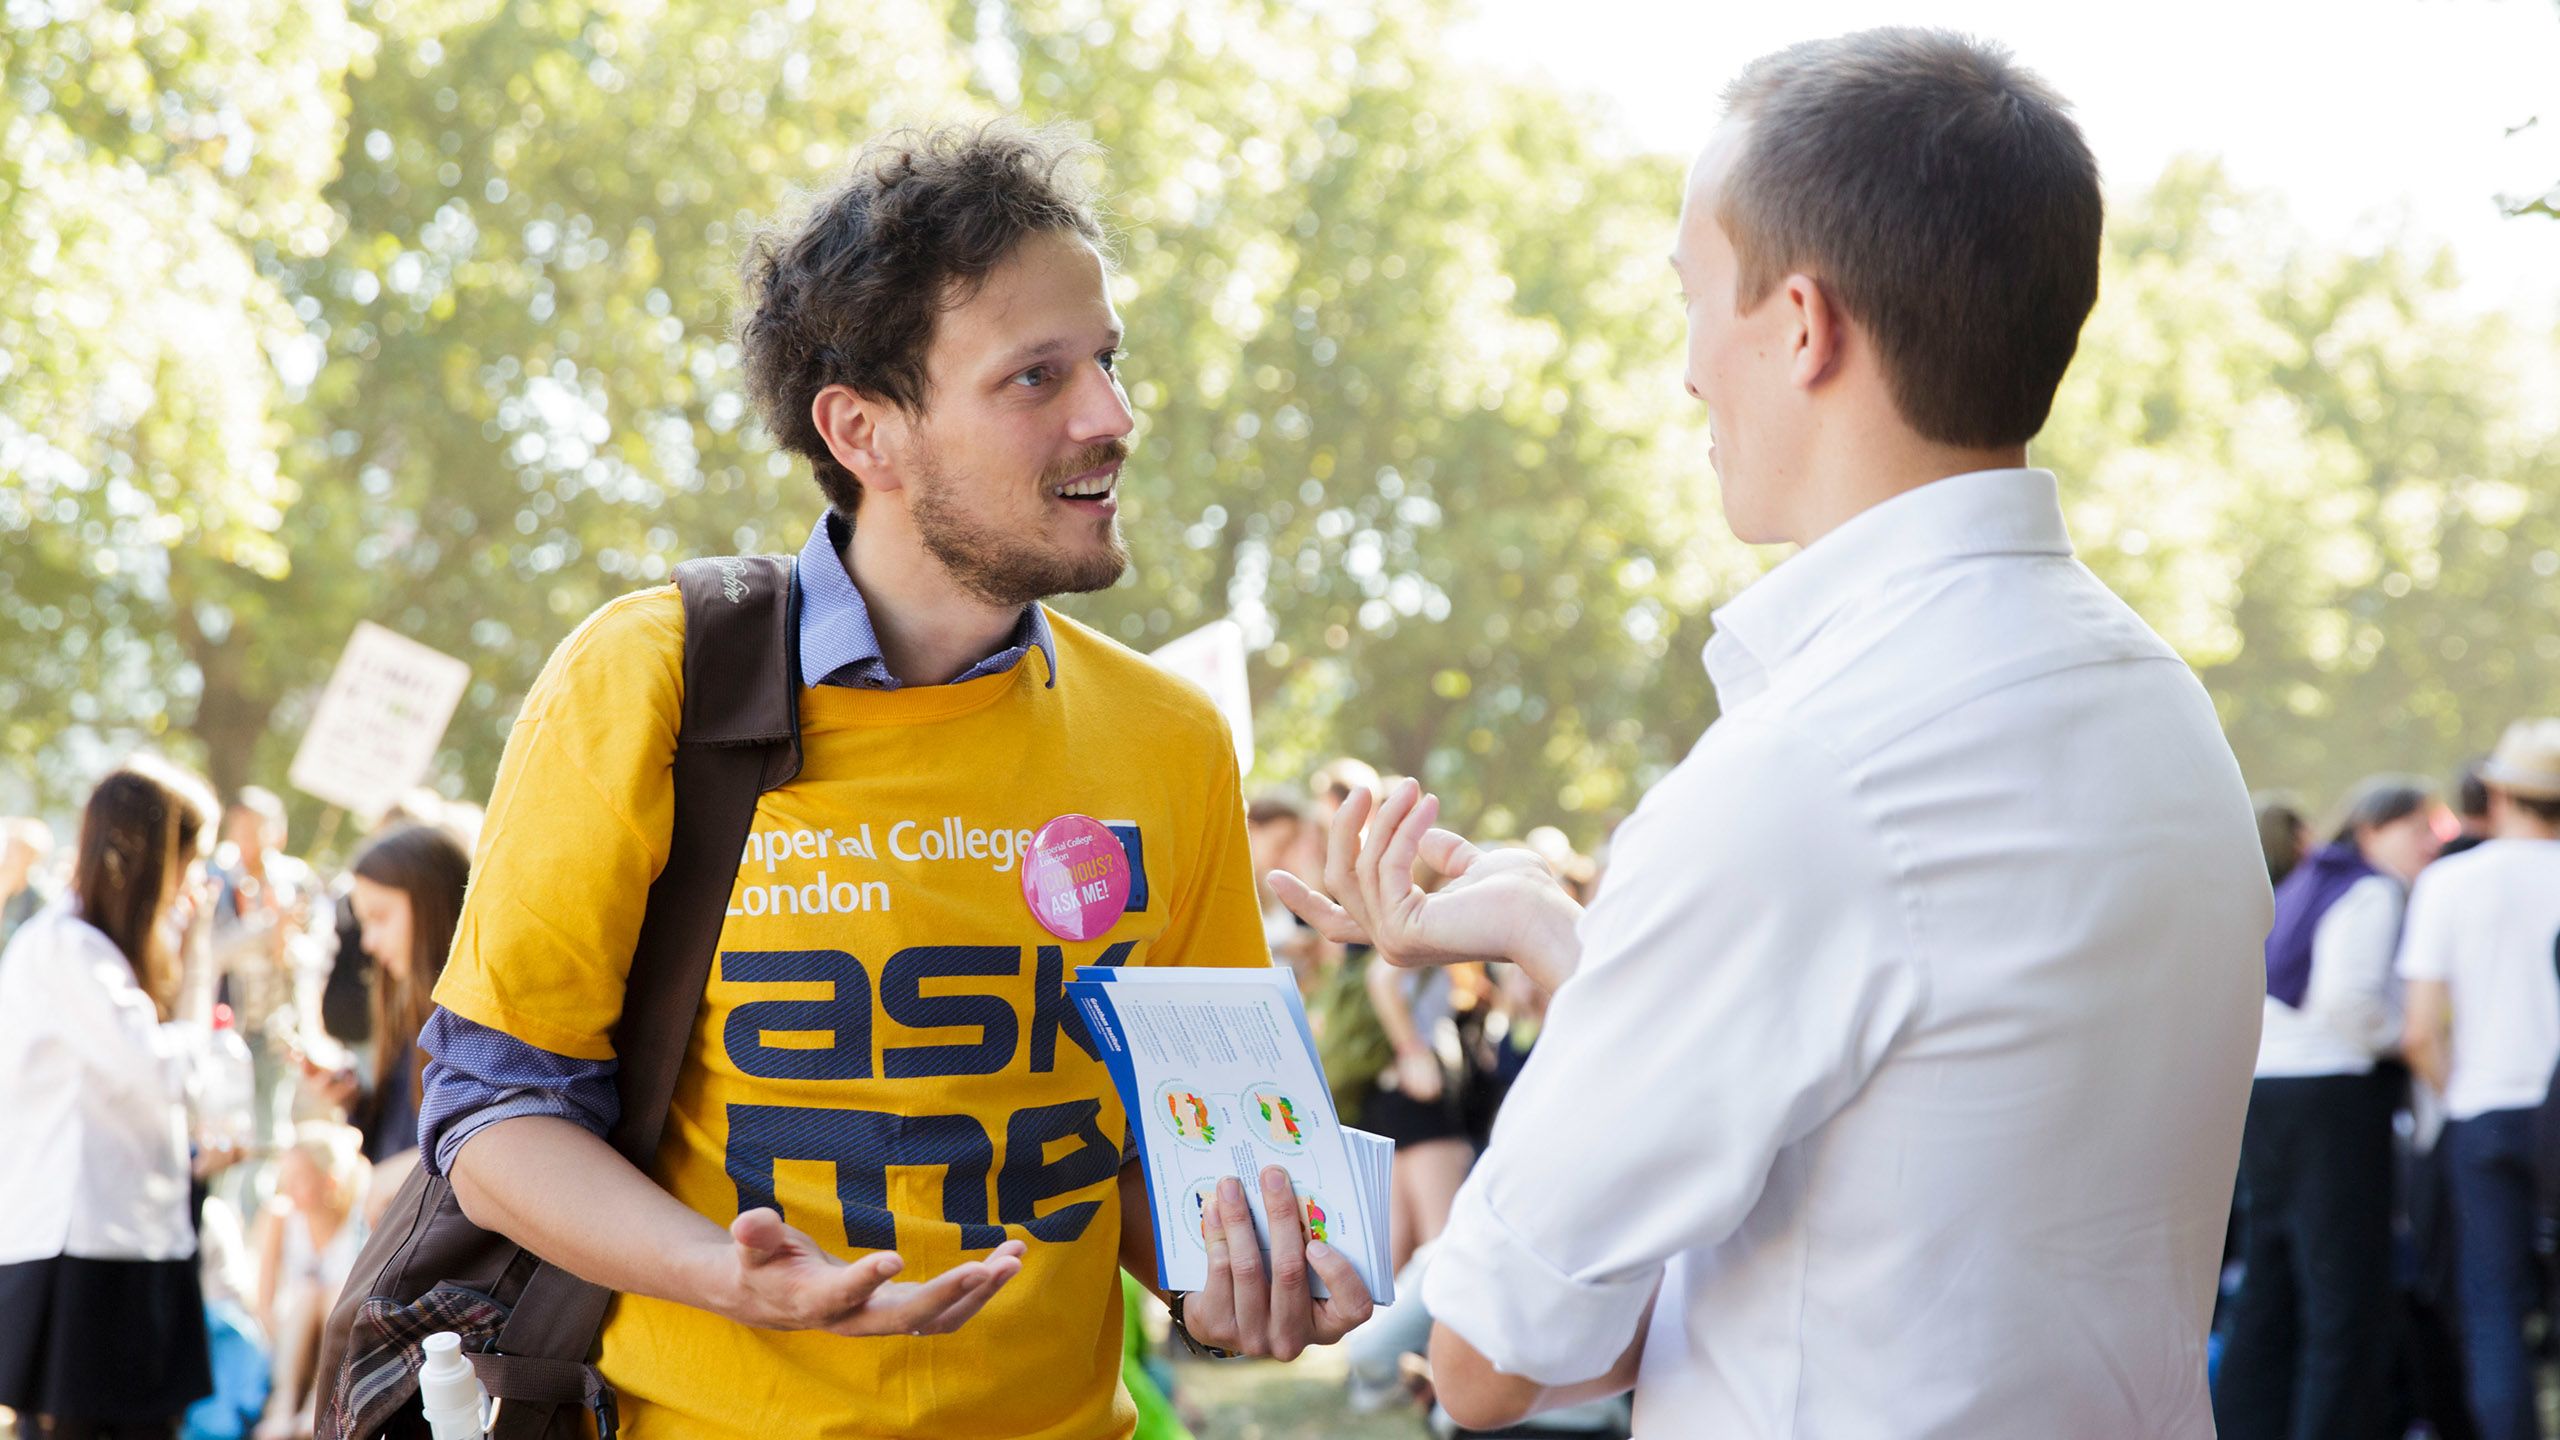 An Imperial climate expert speaks to a member of the public at a climate change rally